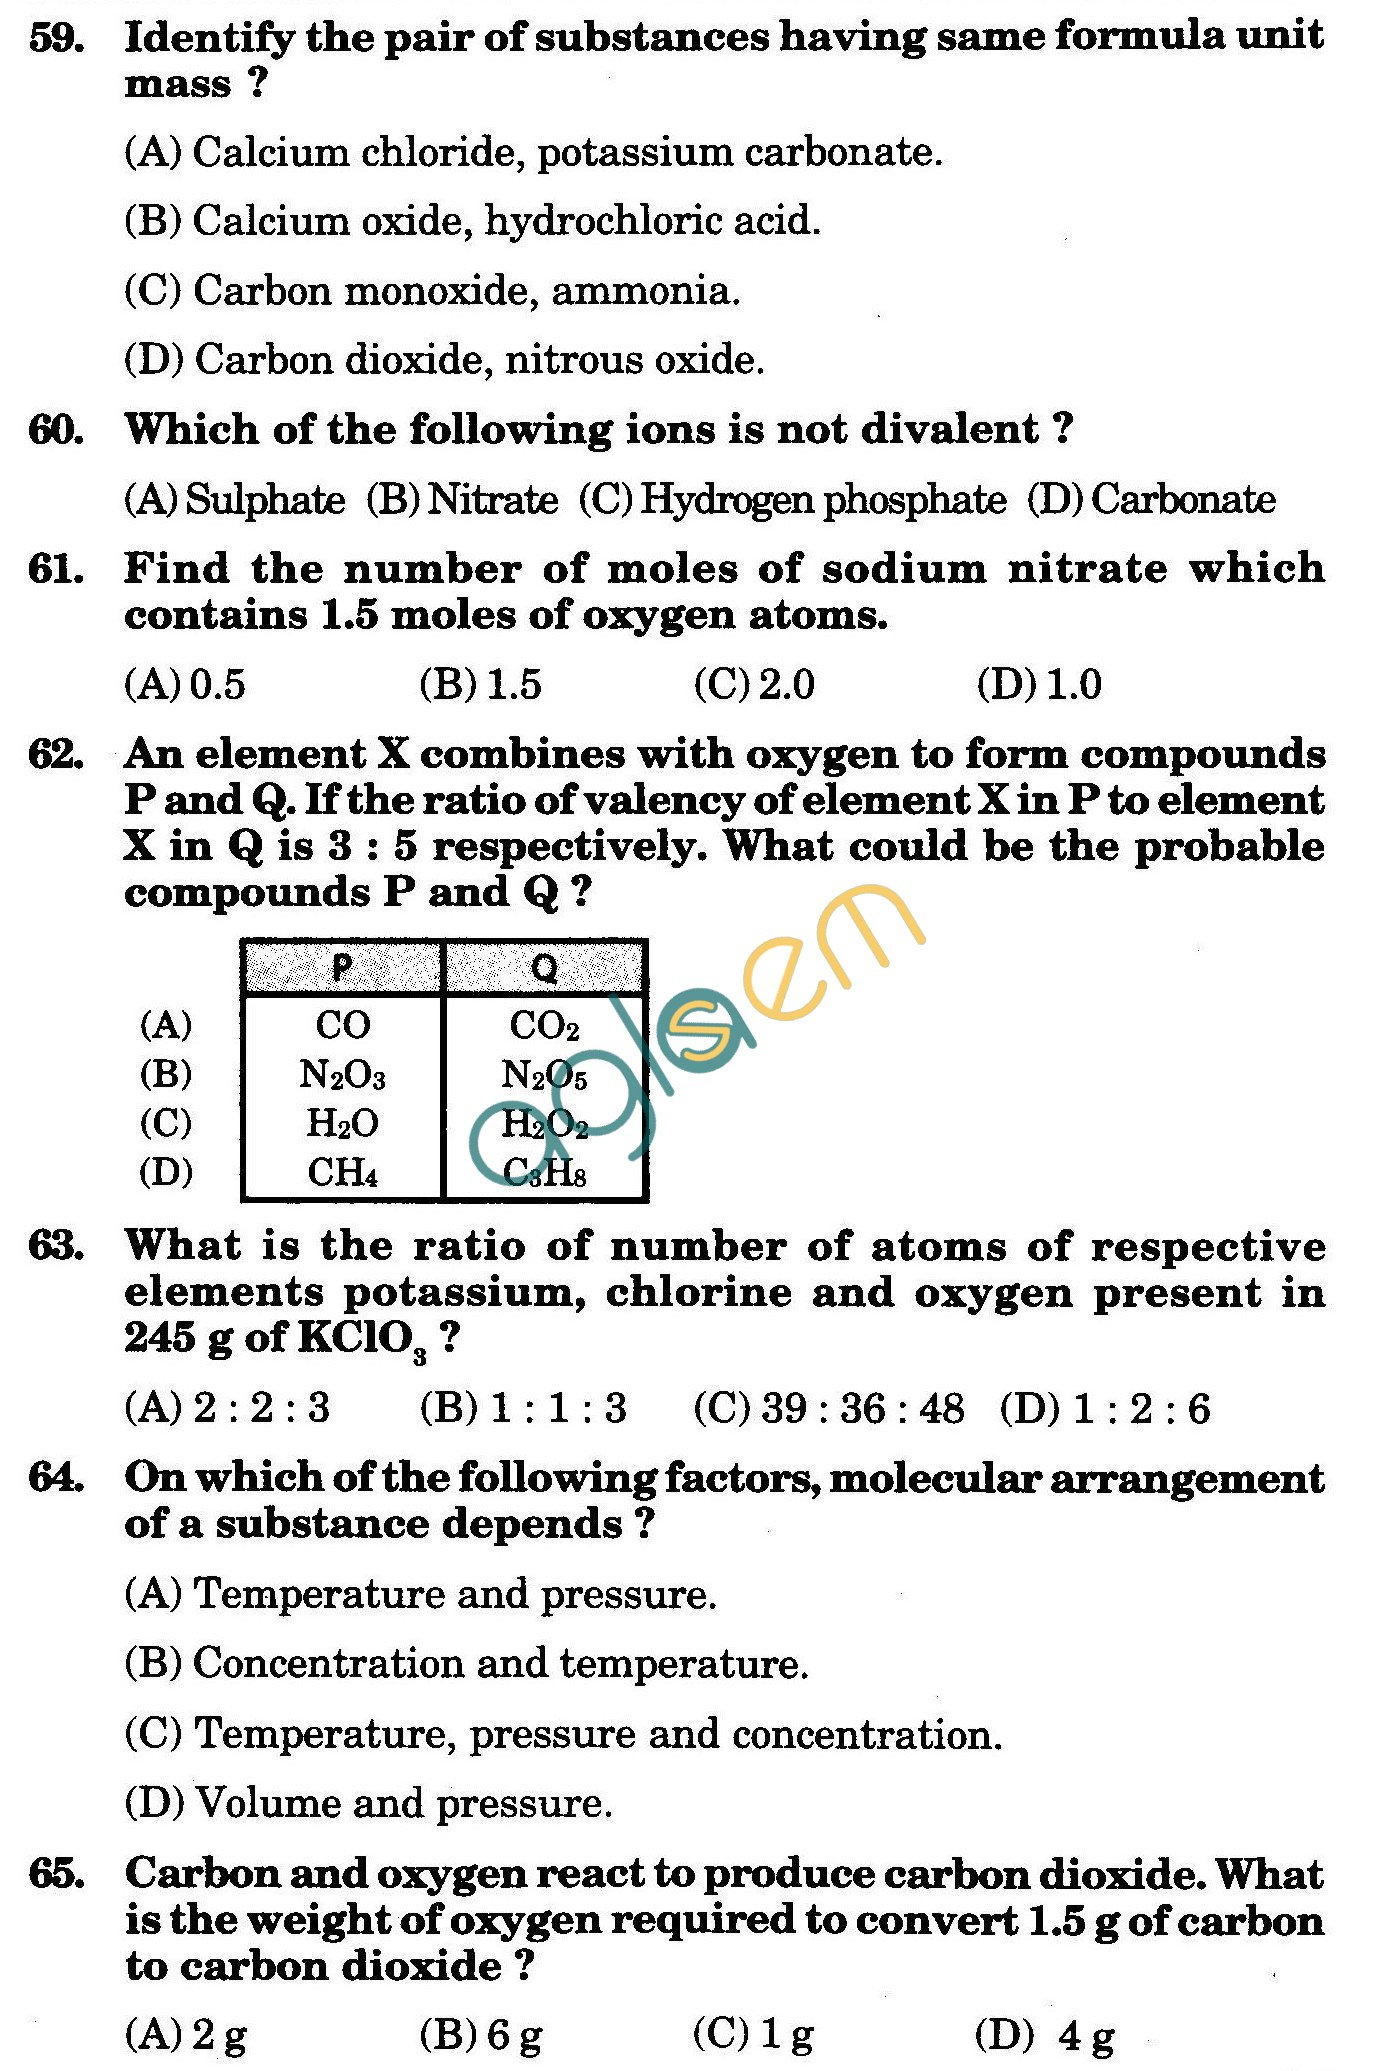 NSTSE 2010: Class IX Question Paper with Answers - Chemistry